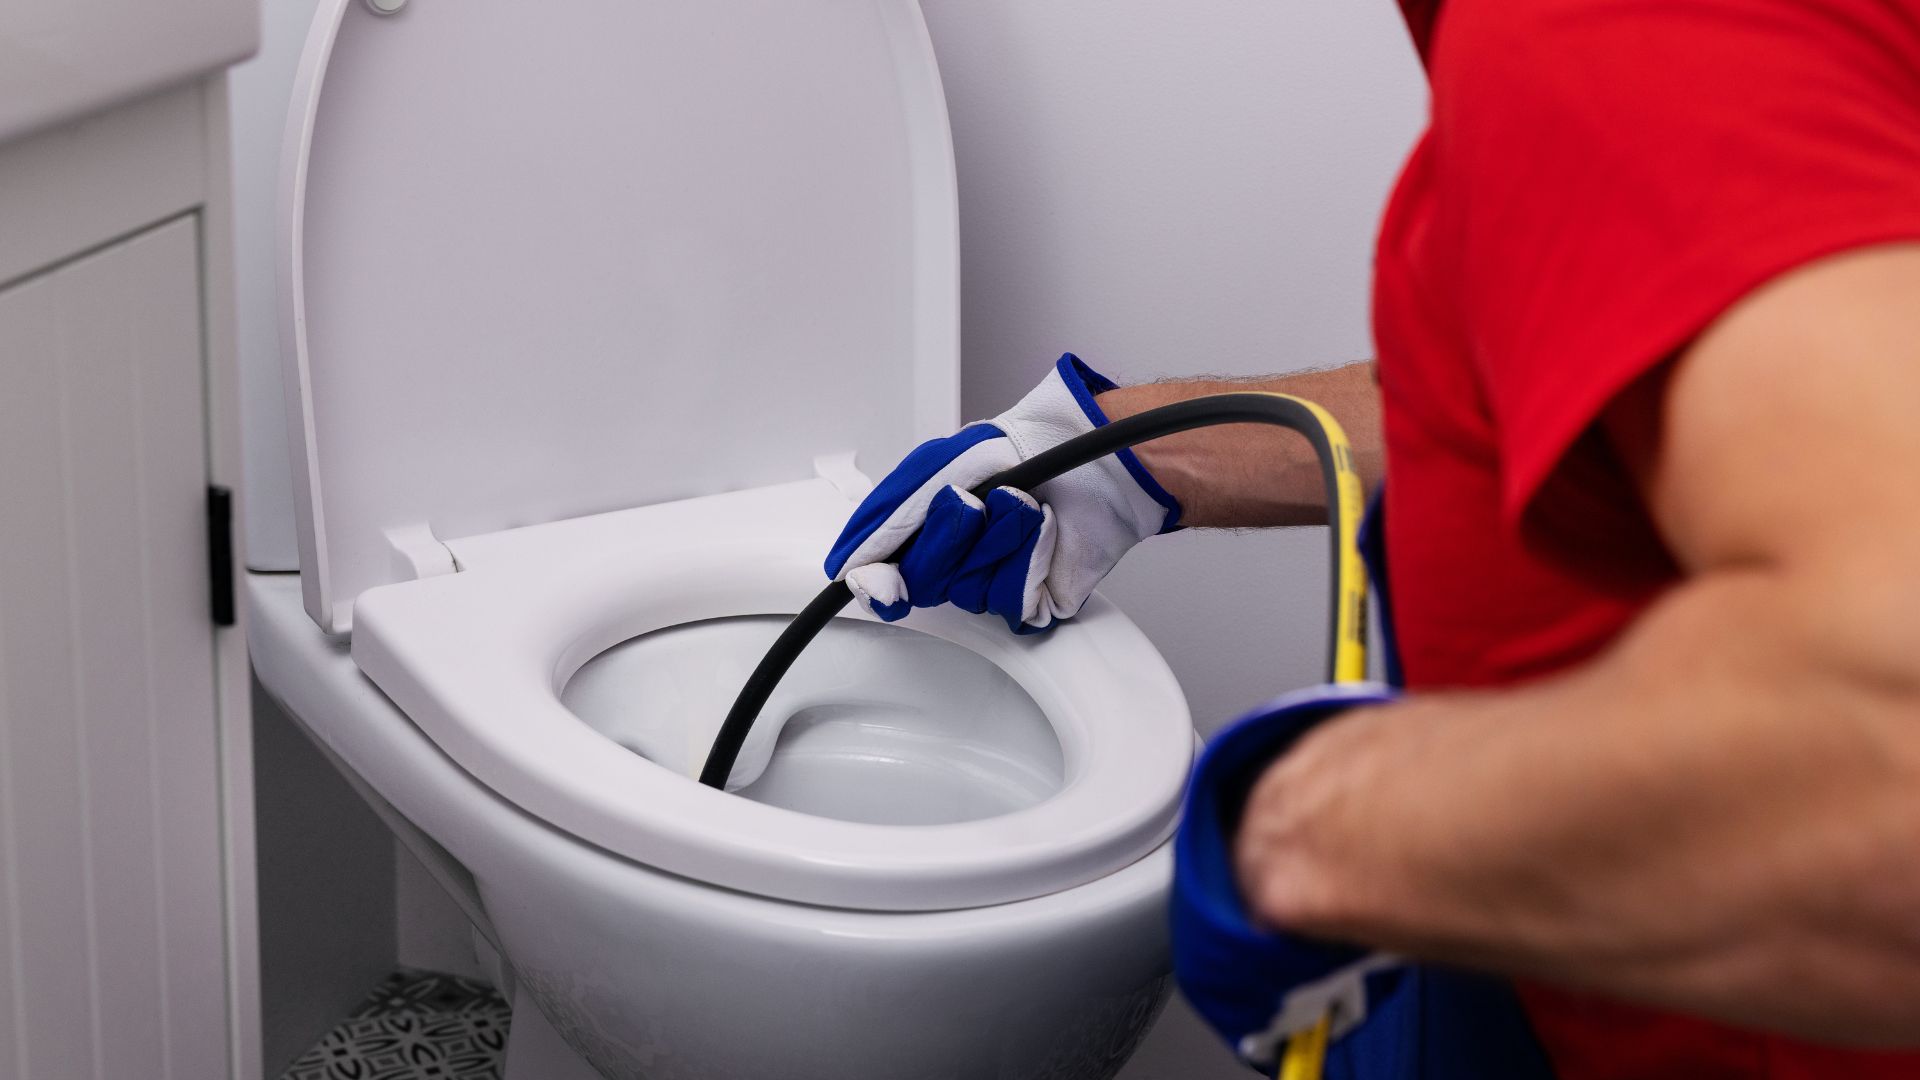 Person unclogging a toilet with a hydro jetter